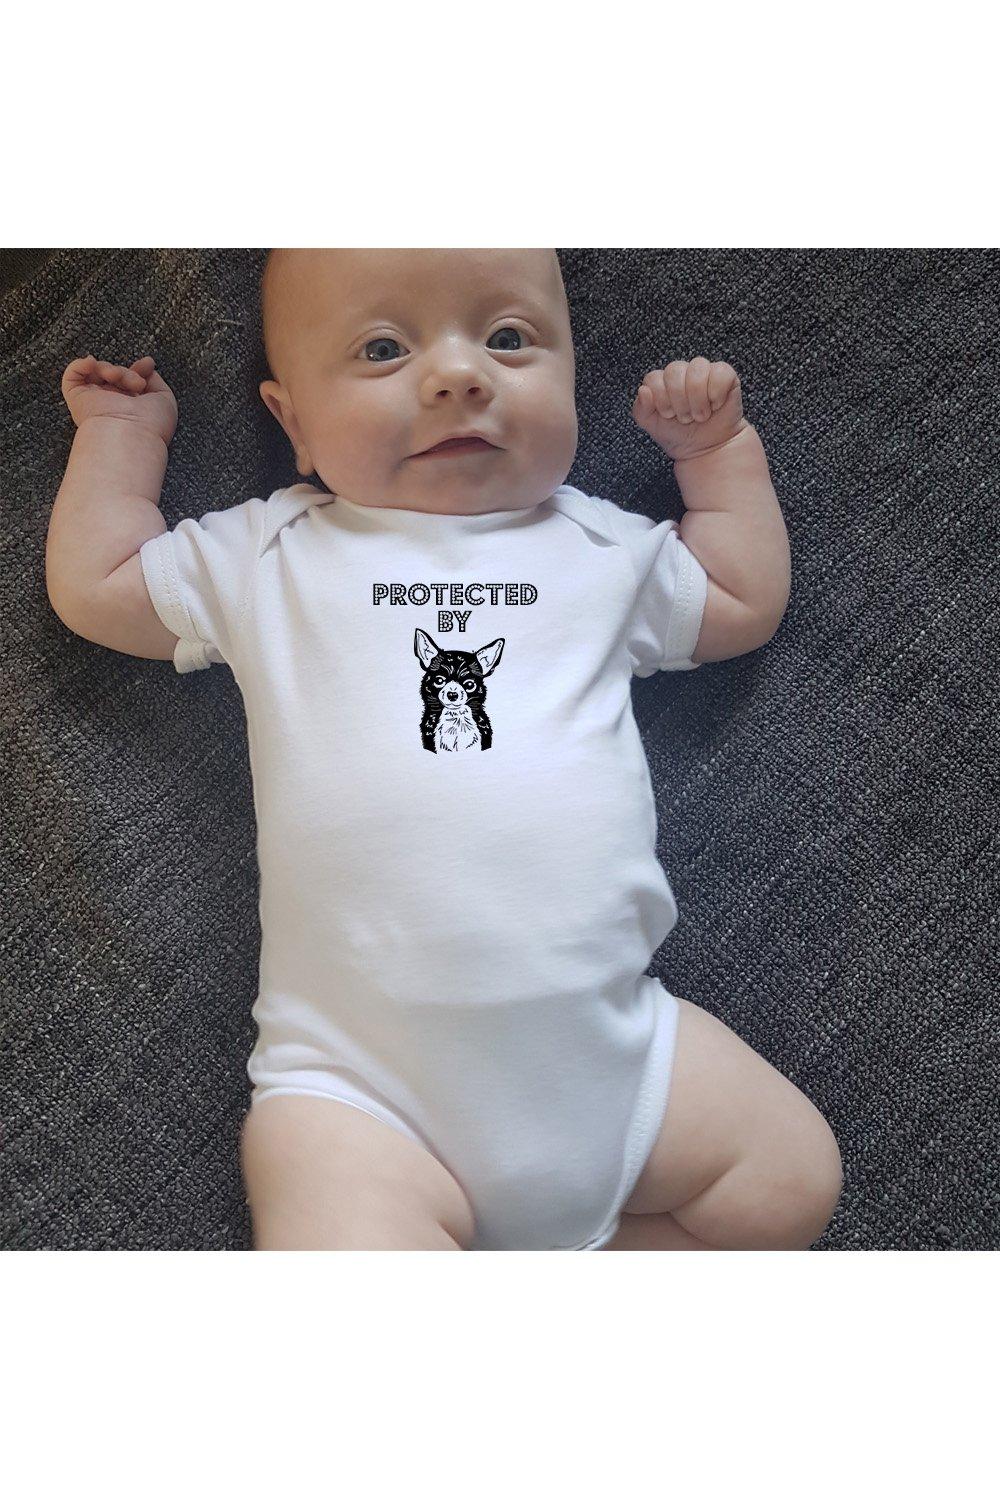 Protected by Chihuahua Dog Baby bodysuit / Baby Grow